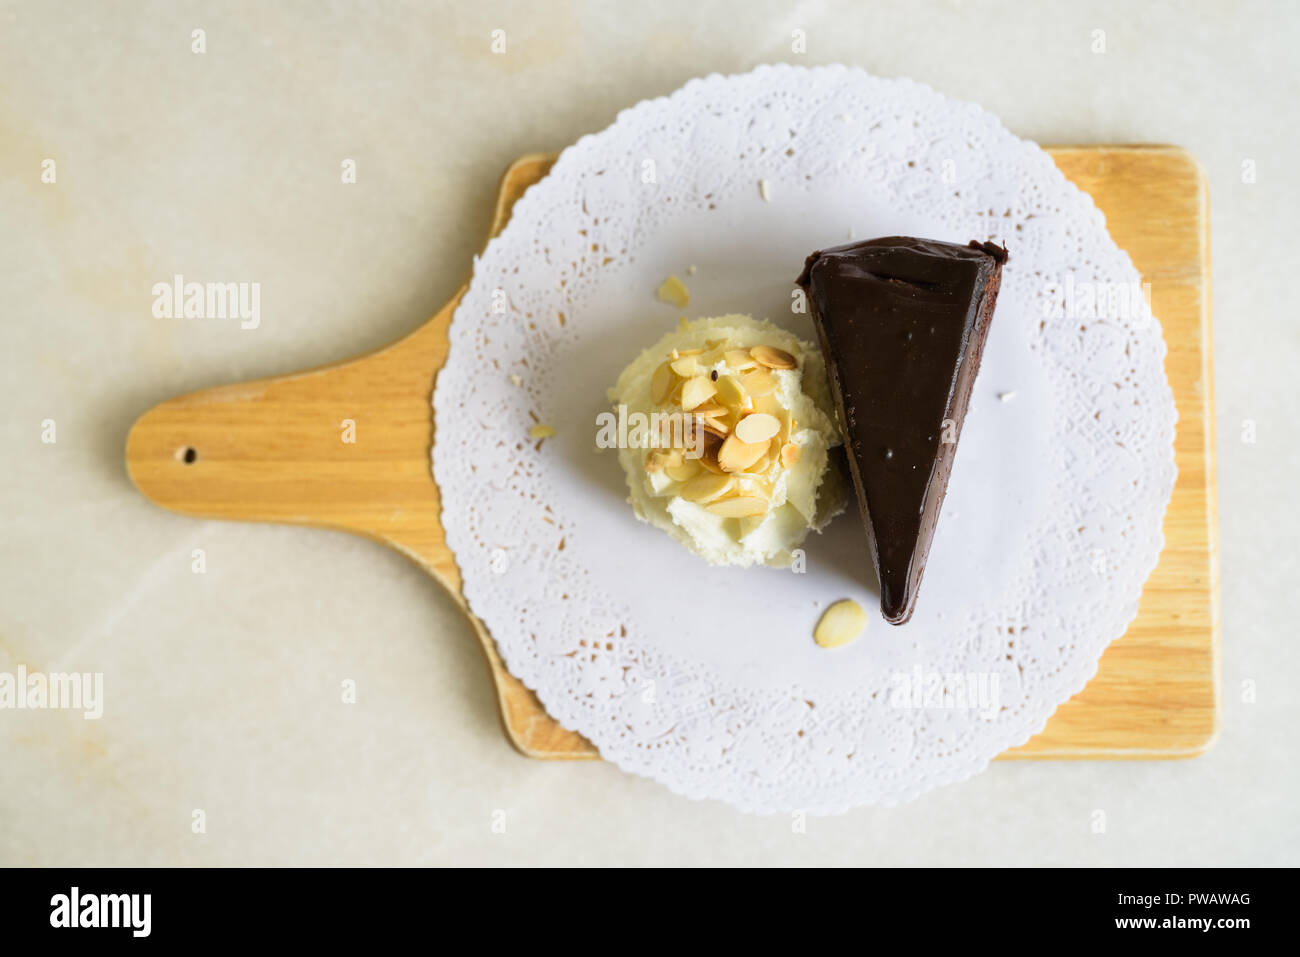 Directly Above Shot Of Chocolate Cake With Whipped Cream Stock Photo